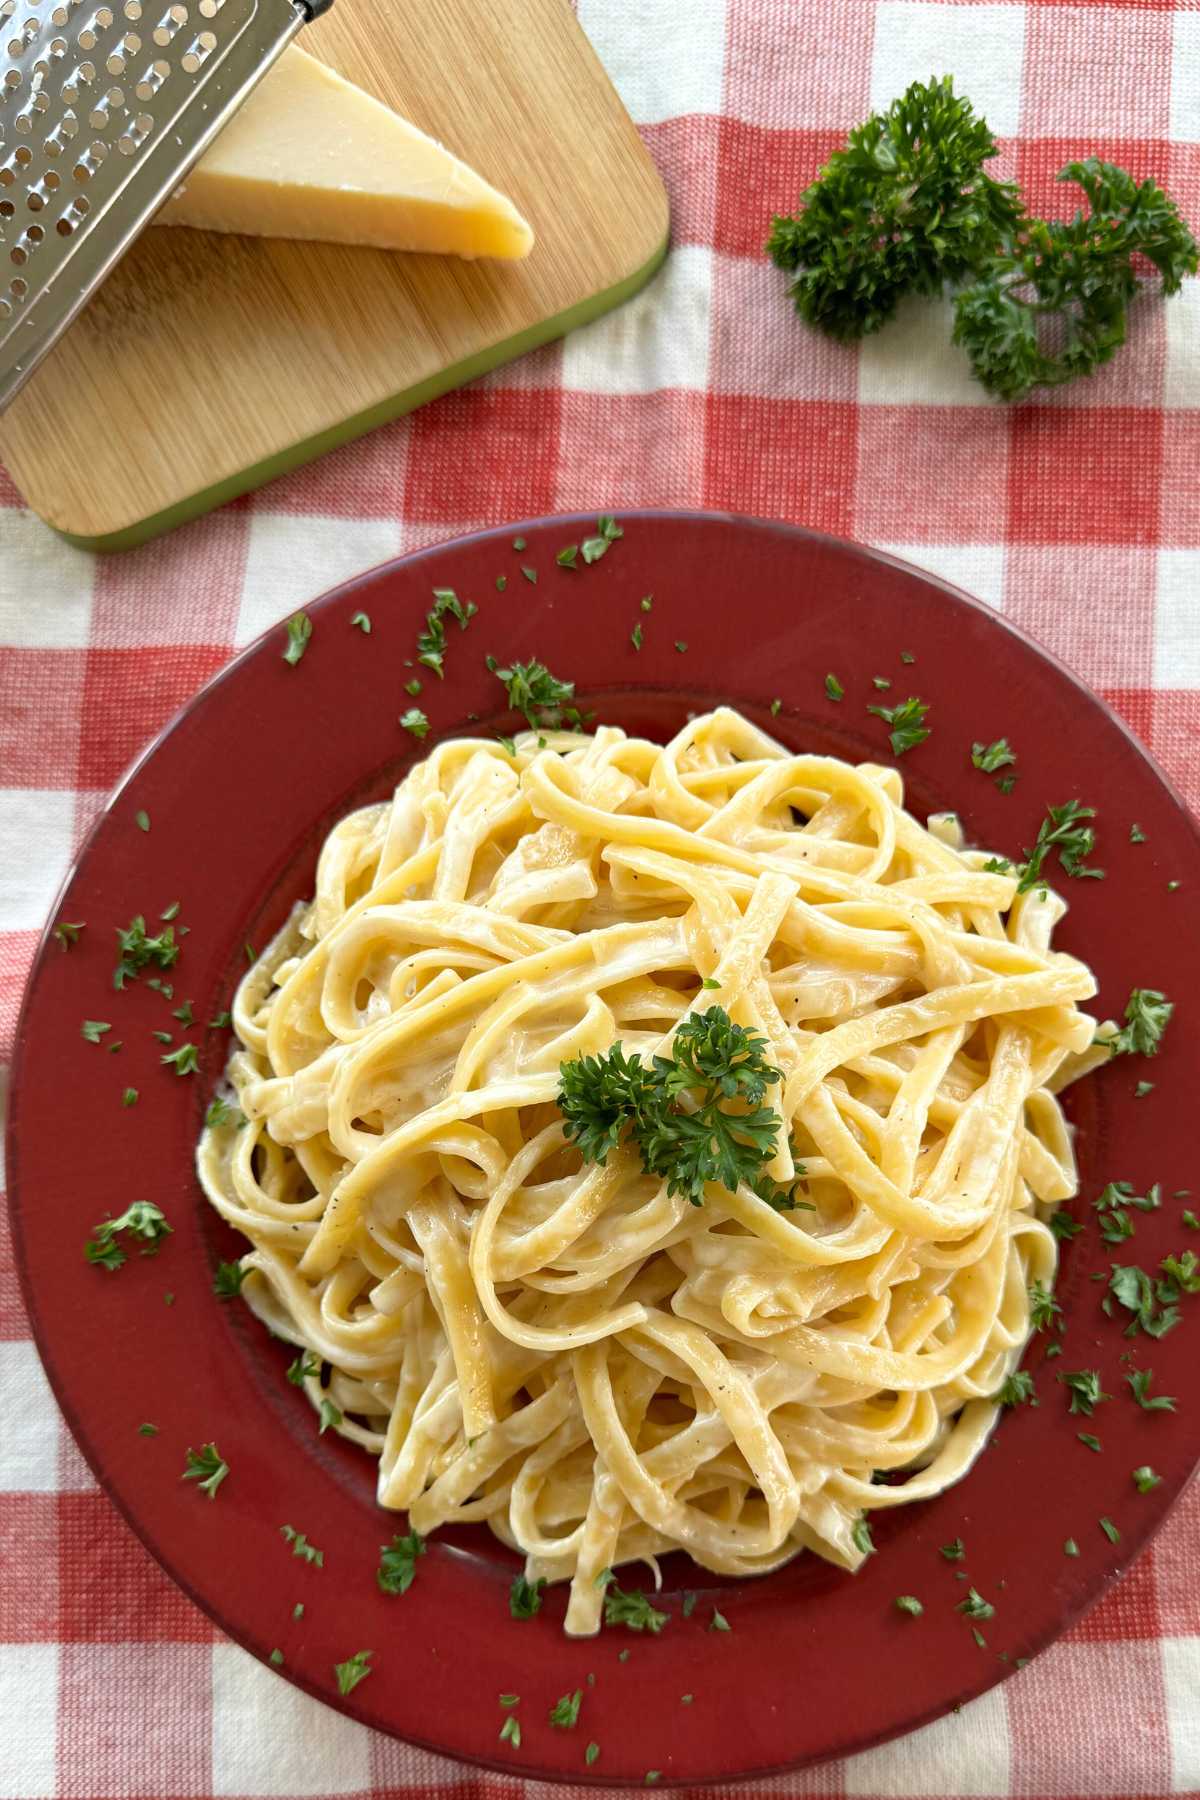 Creamy fettuccine alfredo in a red bowl garnished with parsley with a triangle of Parmesan cheese and a bunch of parsley behind it.